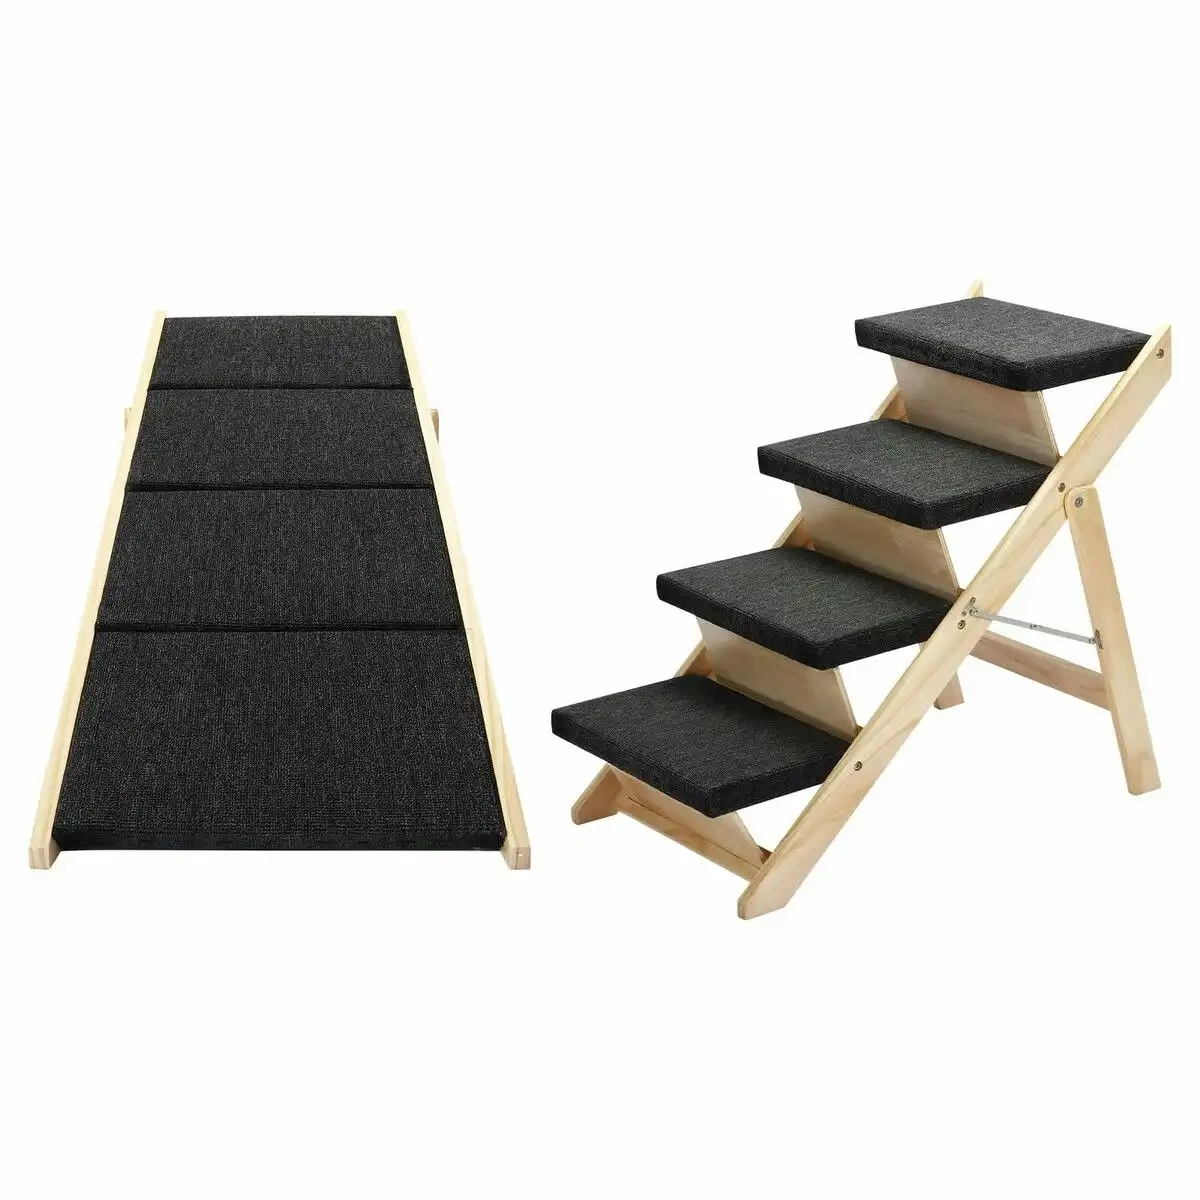 Pet Scene Dog Ramp Pet Stairs 4 Steps for Bed Car Couch Sofa Puppy Cat Ladder Folding Portable 2 in 1 Indoor Outdoor Wood Fabric